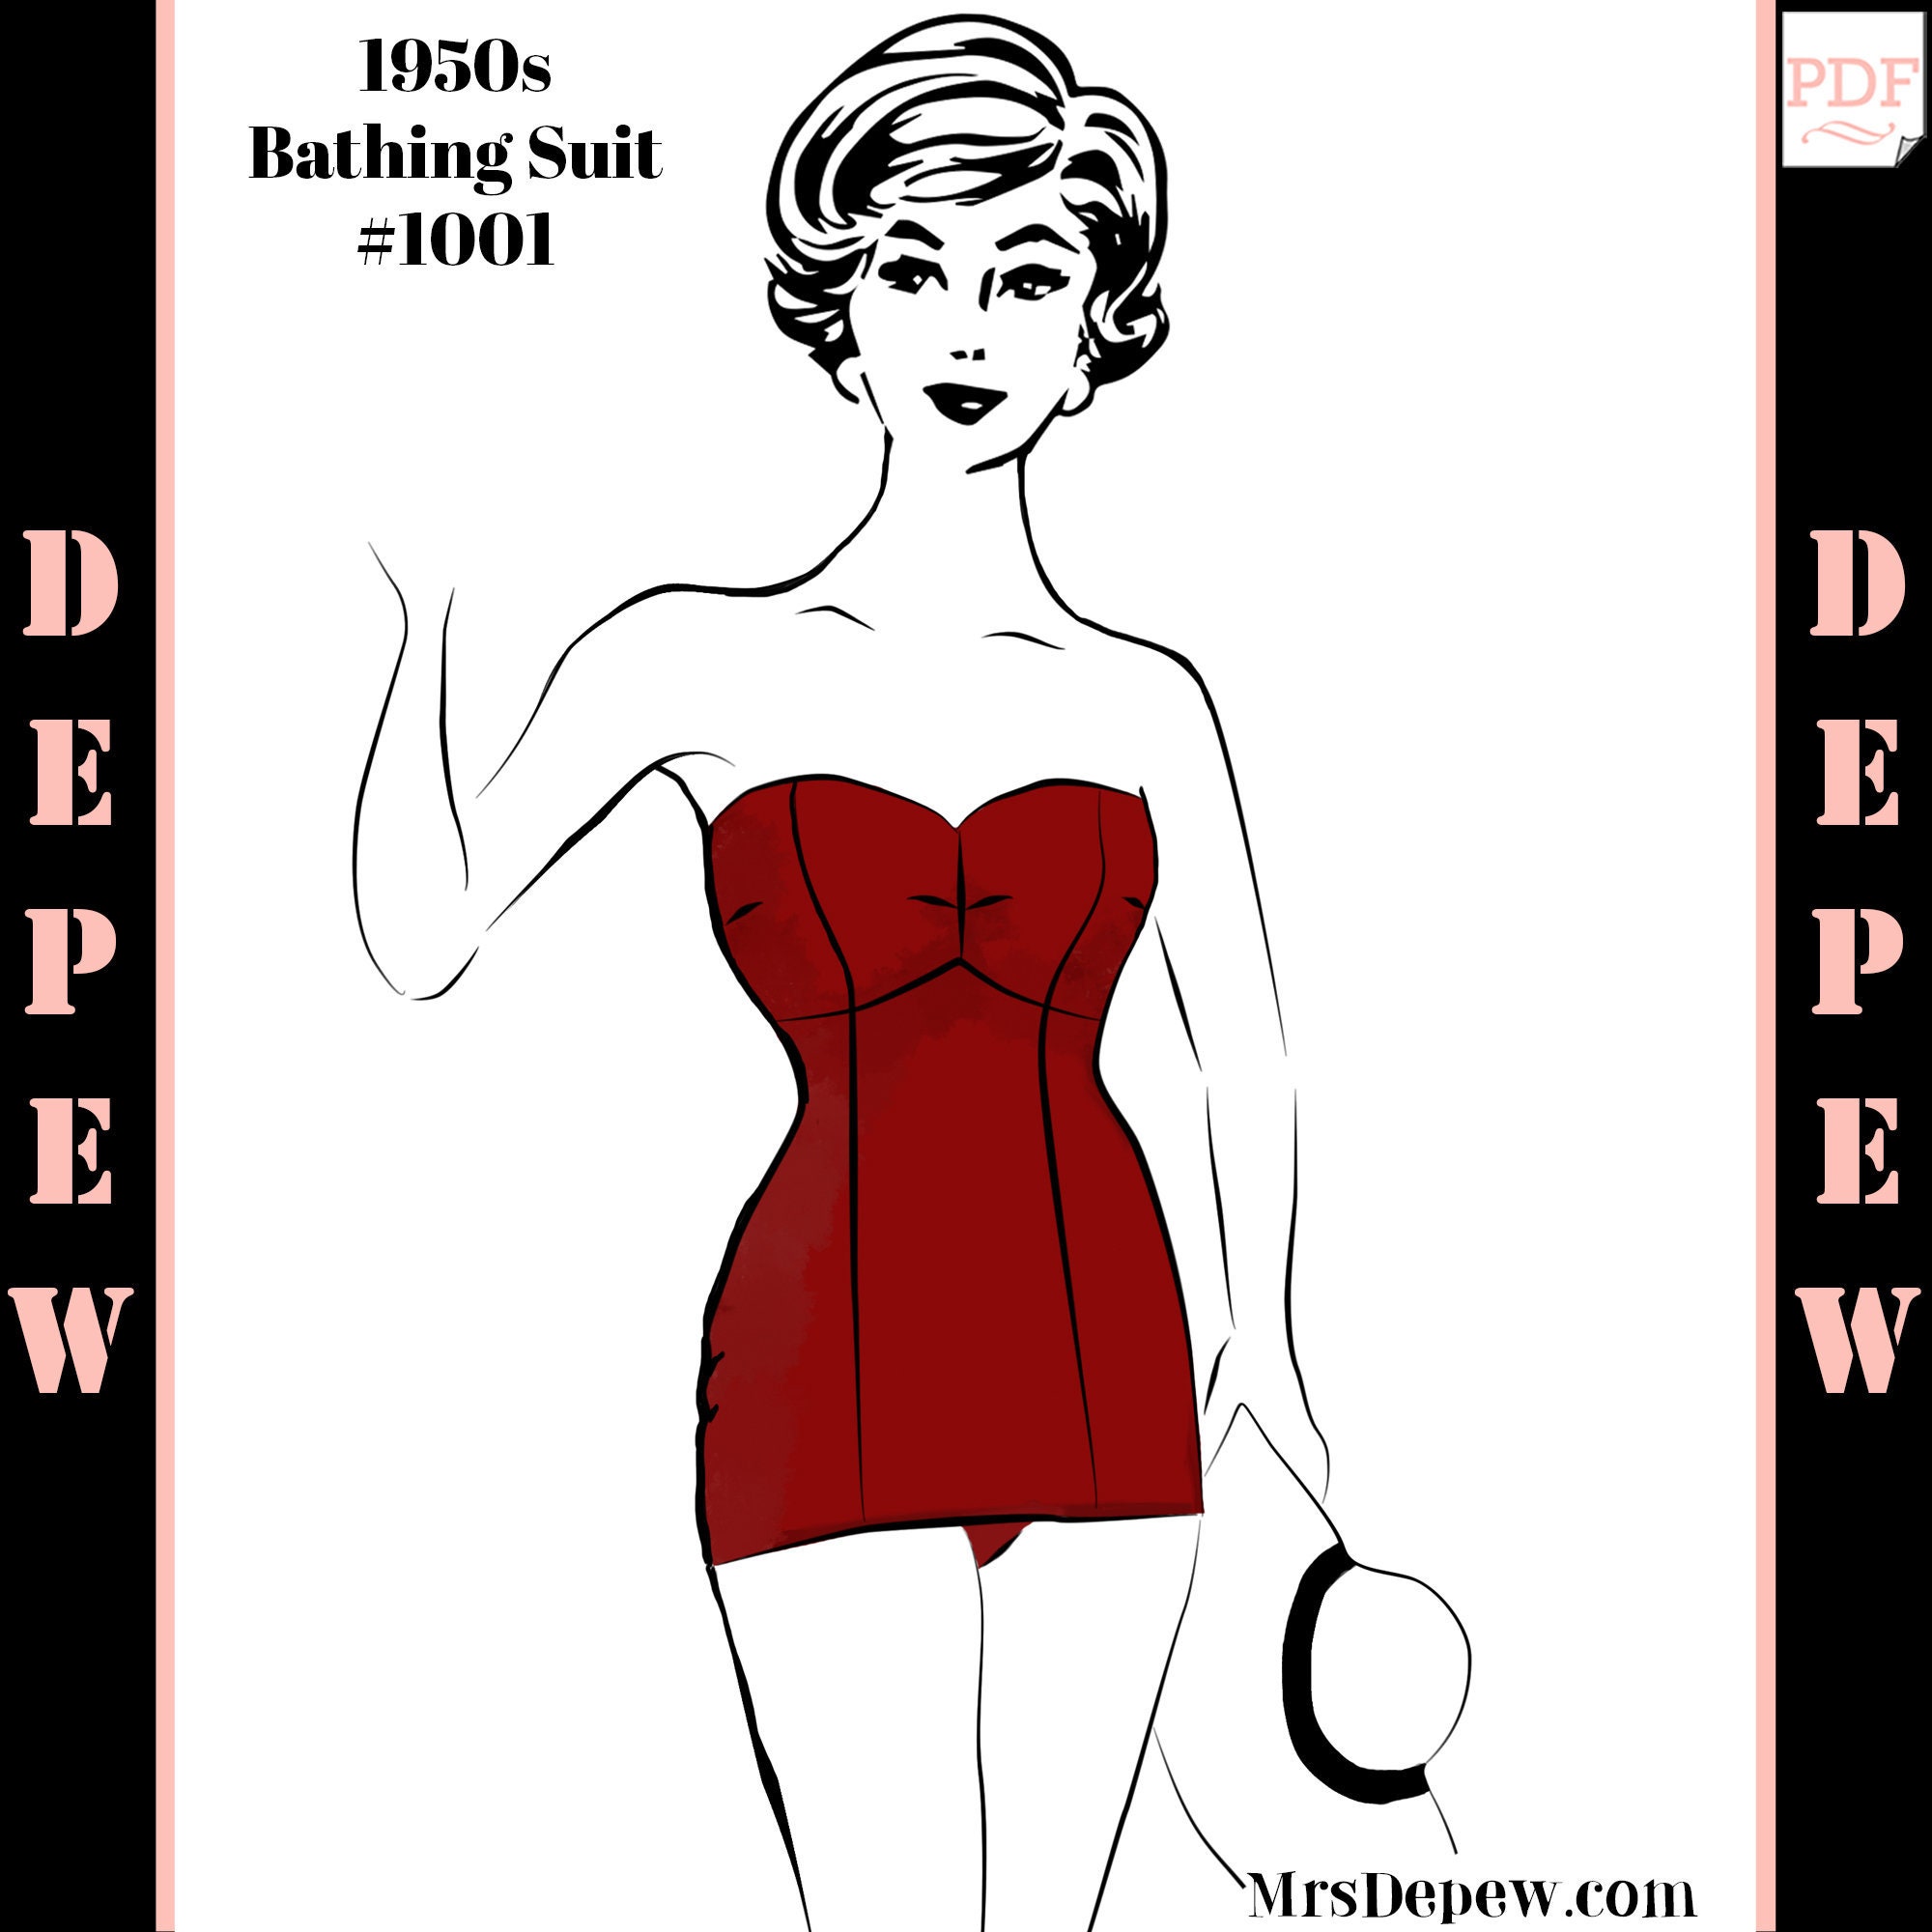 The Vintage Guidebook Review: Getting that 1950s “Wasp Waist”